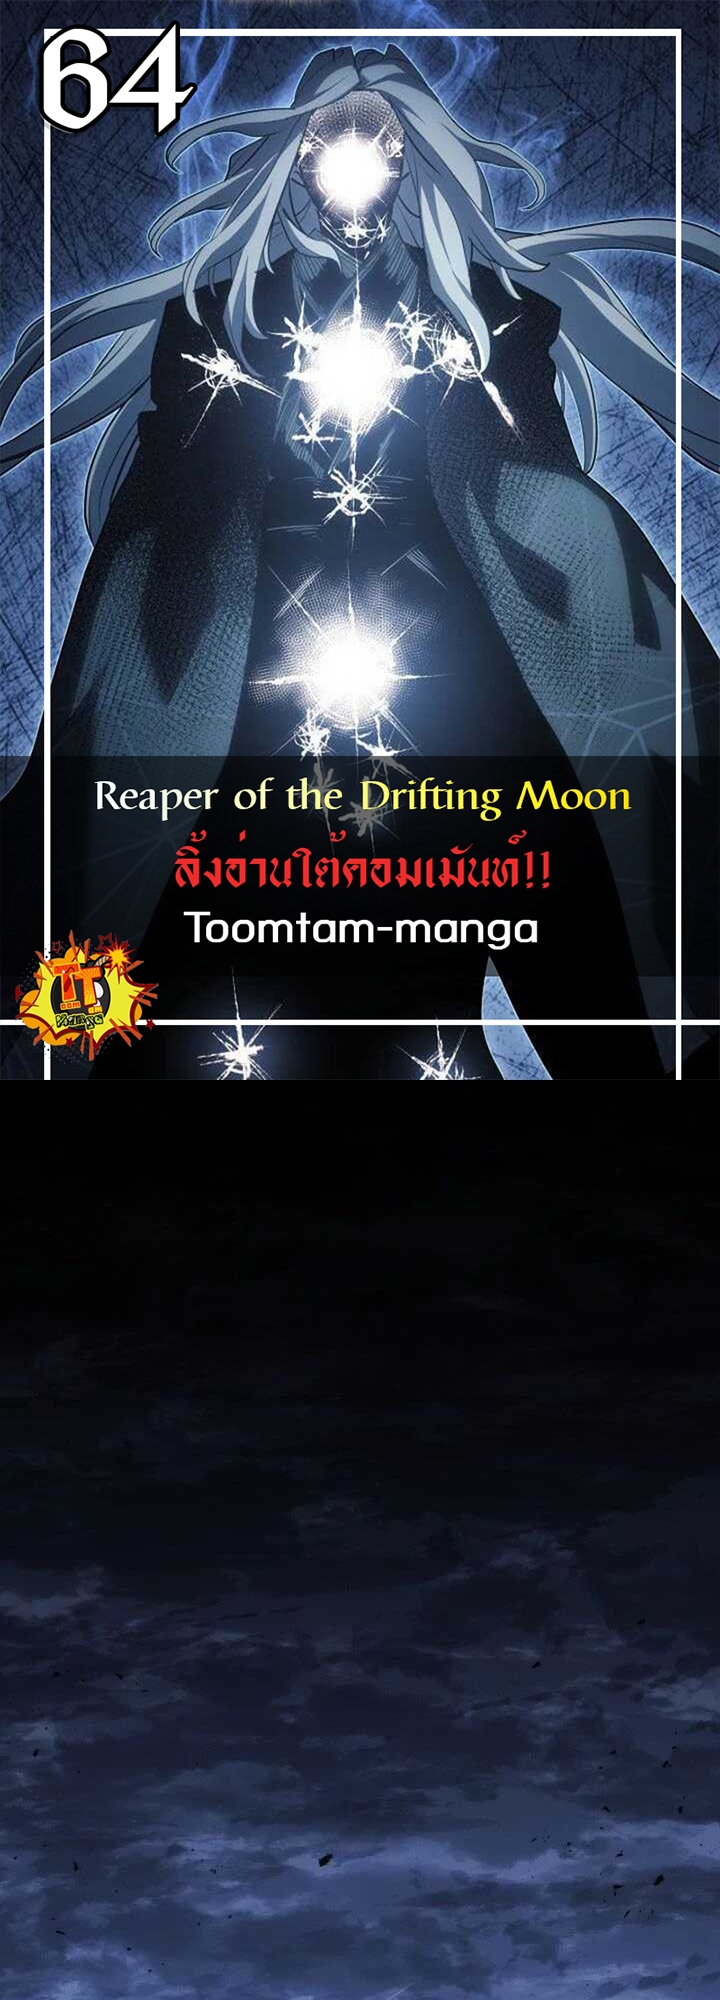 Reaper of the Drifting Moon 64 29 11 25660001